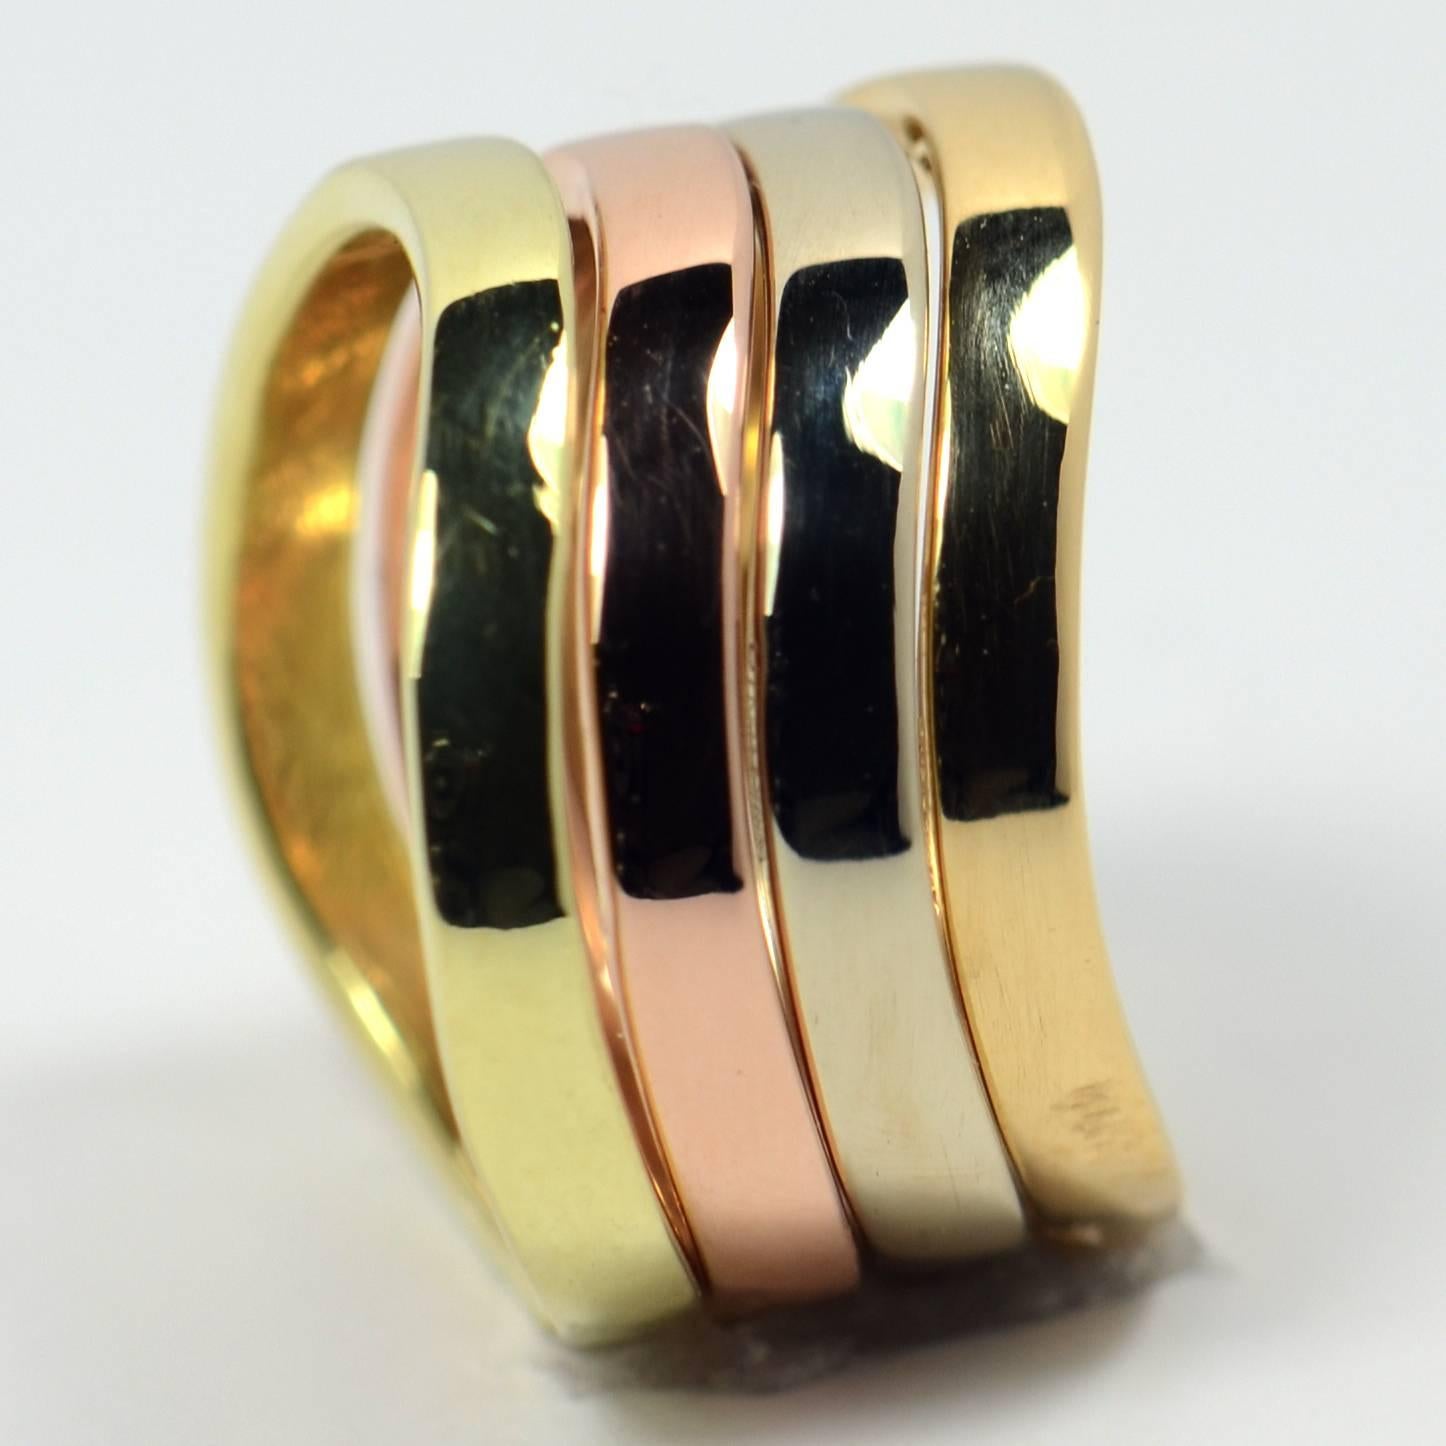 Four French undulating gold stacking rings by Jean Dinh Van in yellow gold, rose gold and white gold.

These rings were made to be stacked! Each ring has a sinuous wavelike form in yellow, rose and white gold, with a fourth shade that is a mixture